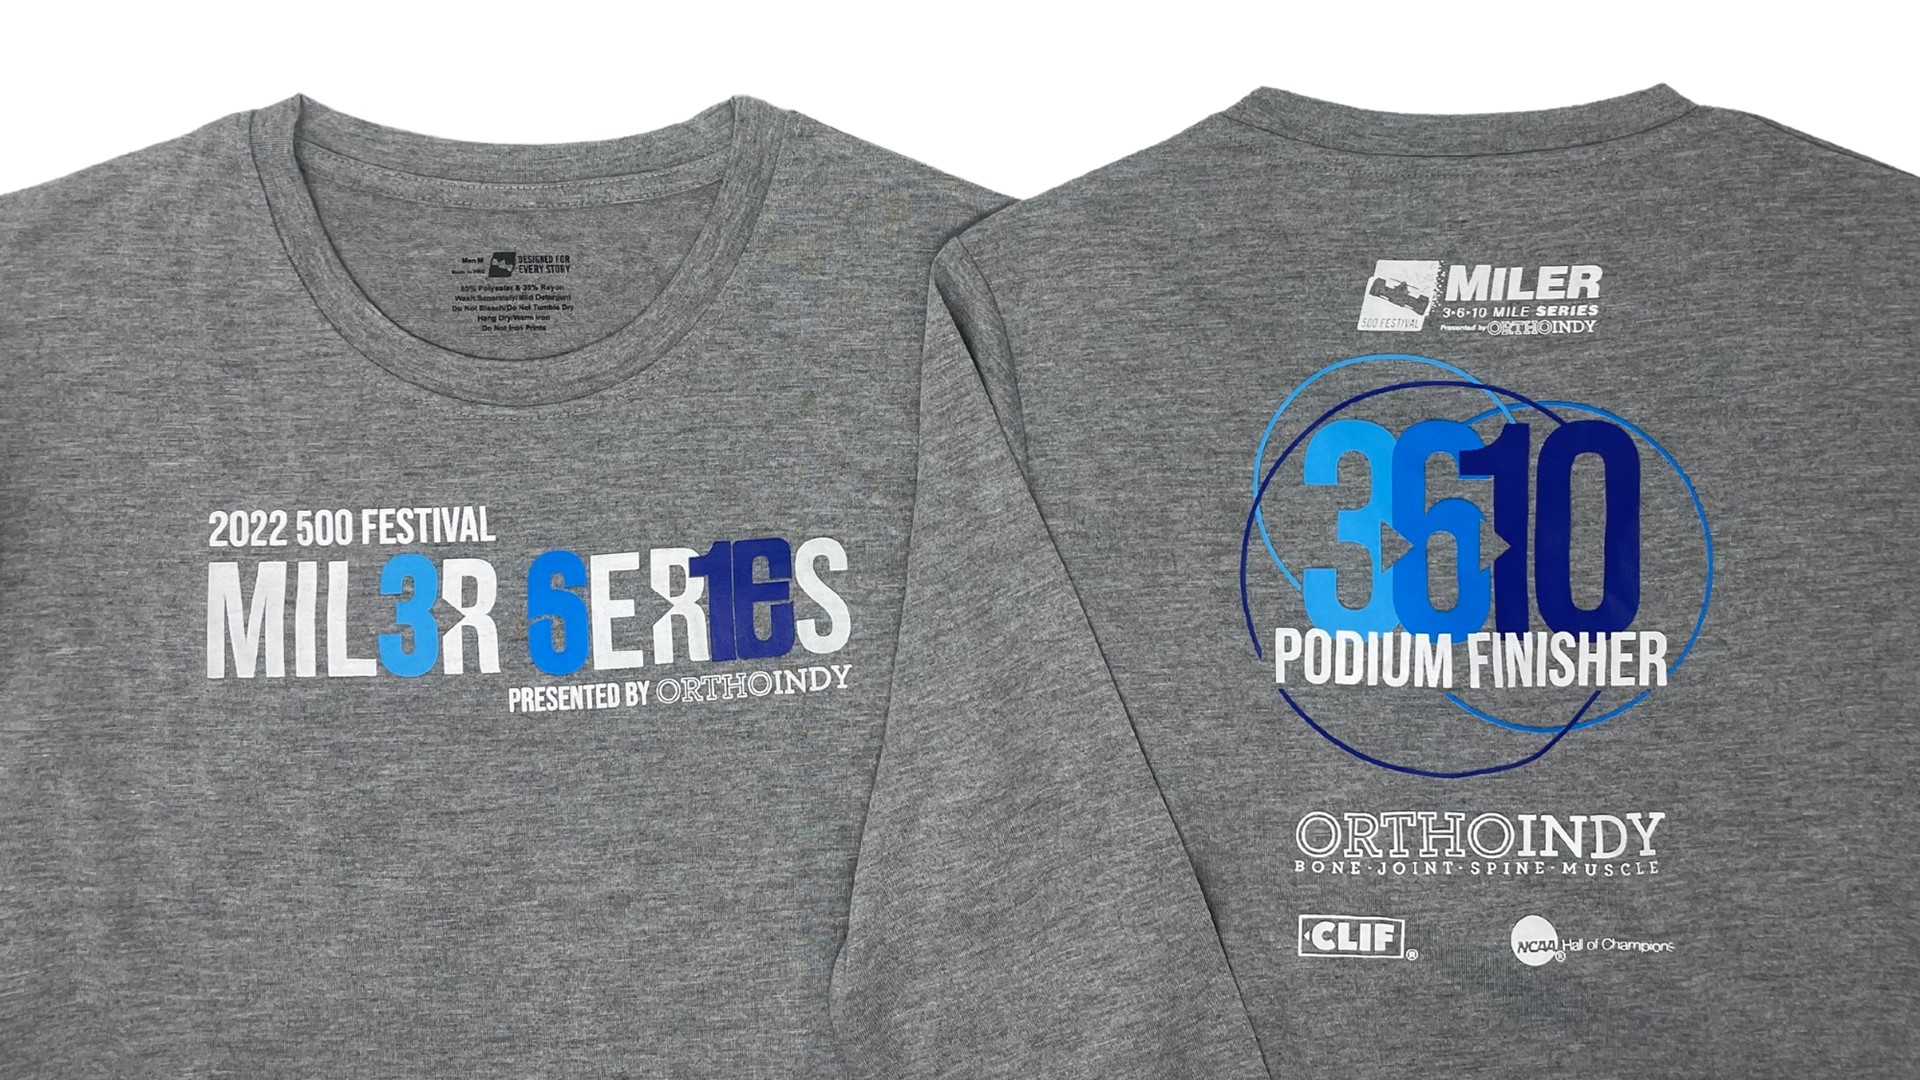 After a virtual event in 2021, the 500 Festival Miler Series is back in person. The organization released images of this year's commemorative medals and T-shirts.